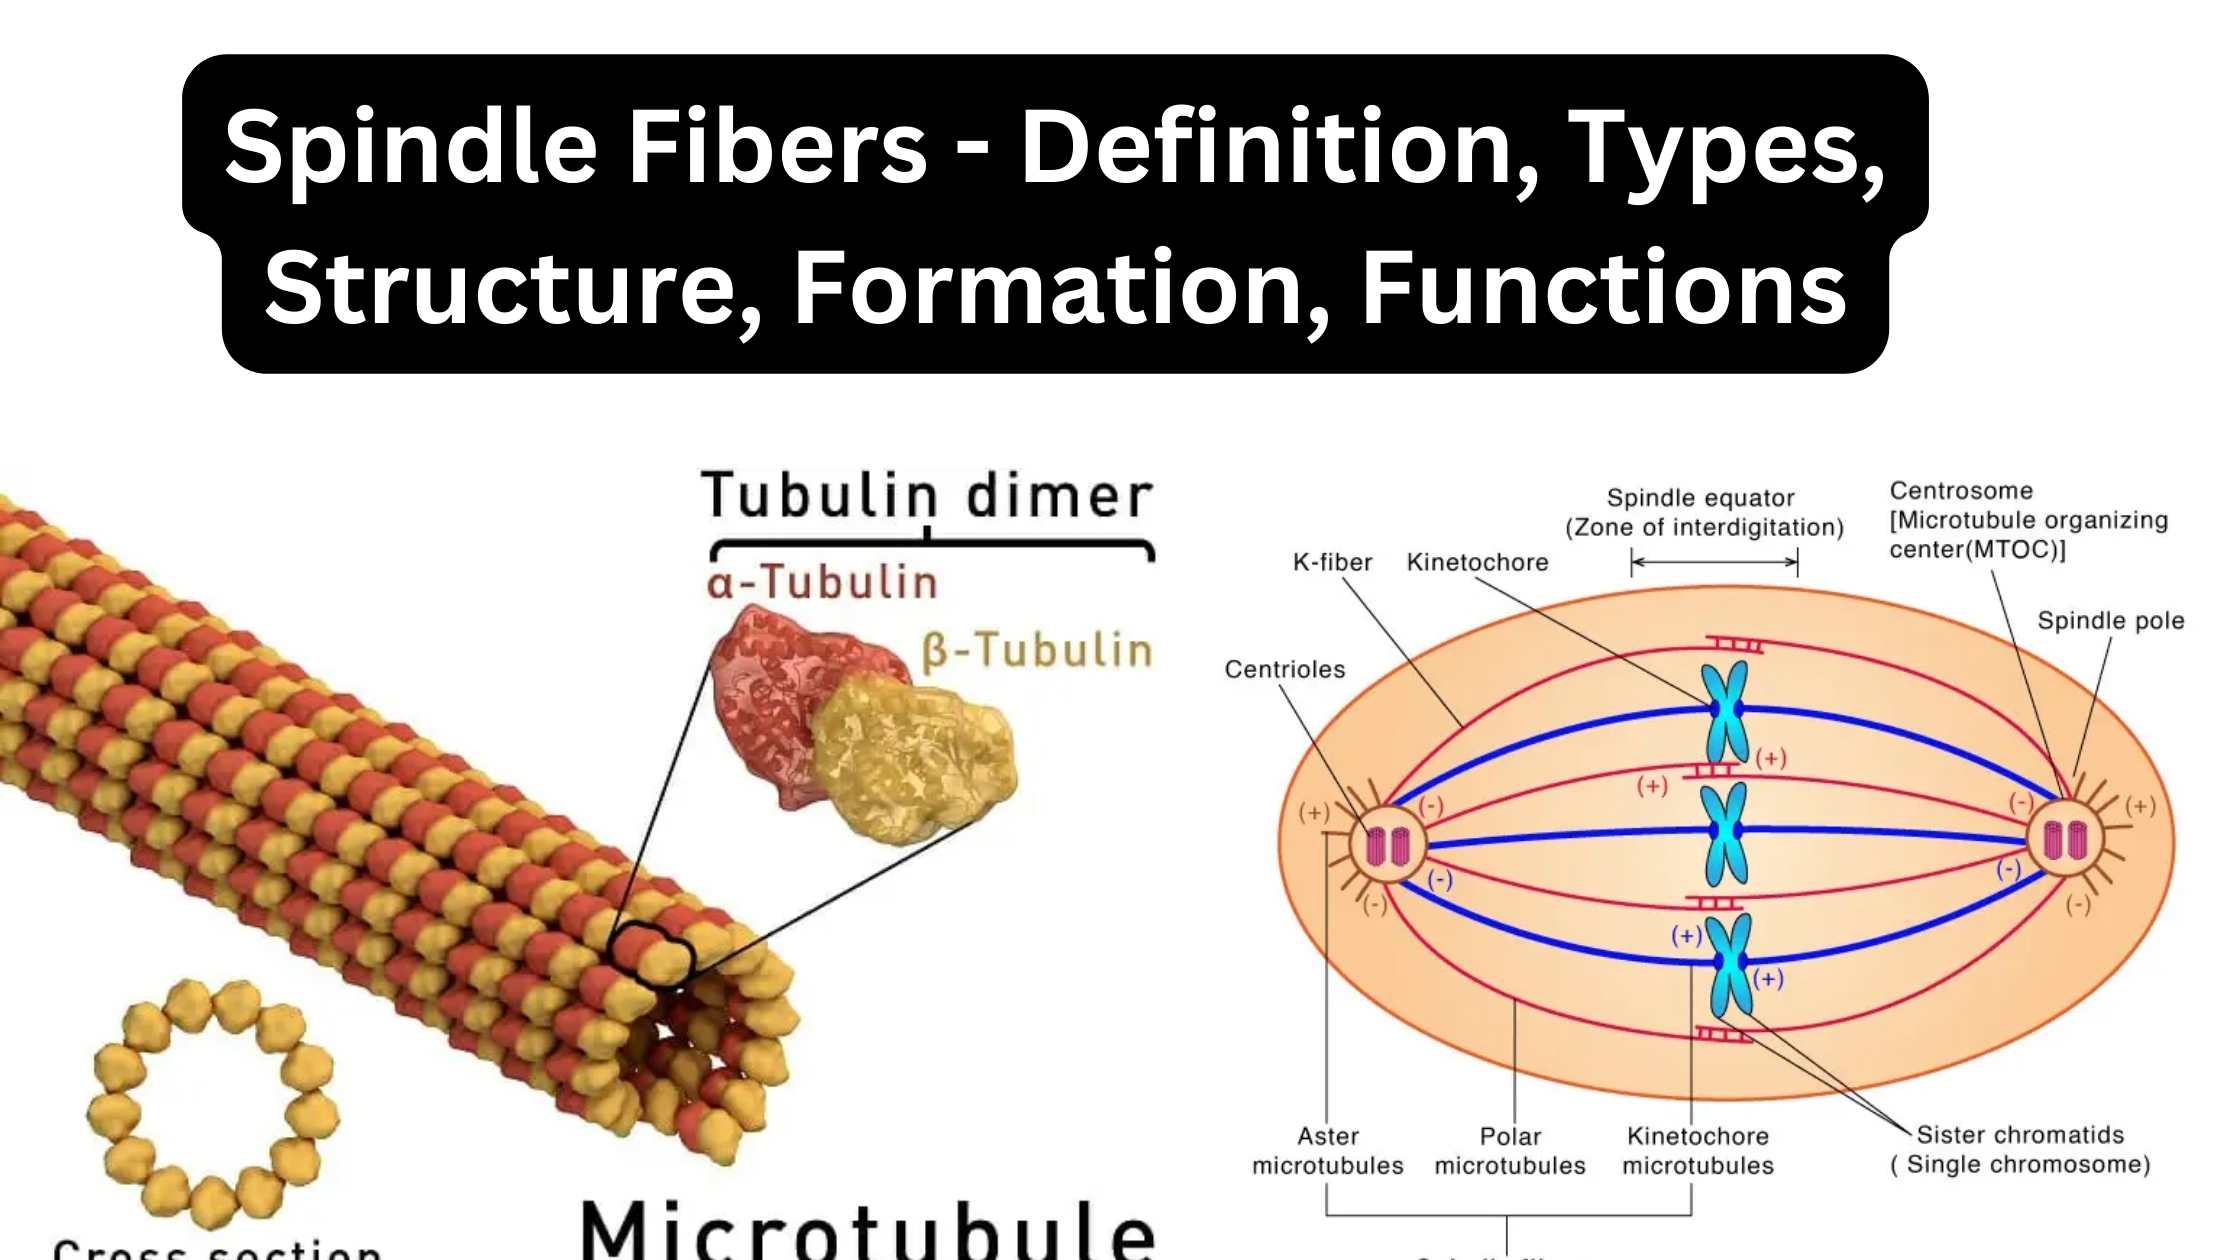 Spindle Fibers - Definition, Types, Structure, Formation, Functions